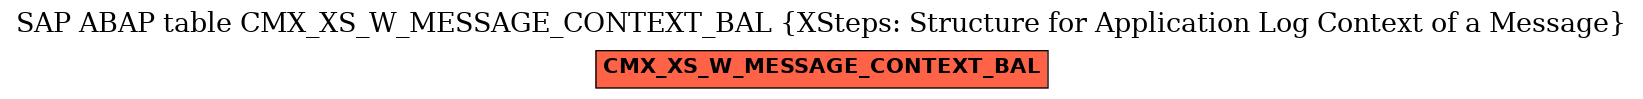 E-R Diagram for table CMX_XS_W_MESSAGE_CONTEXT_BAL (XSteps: Structure for Application Log Context of a Message)